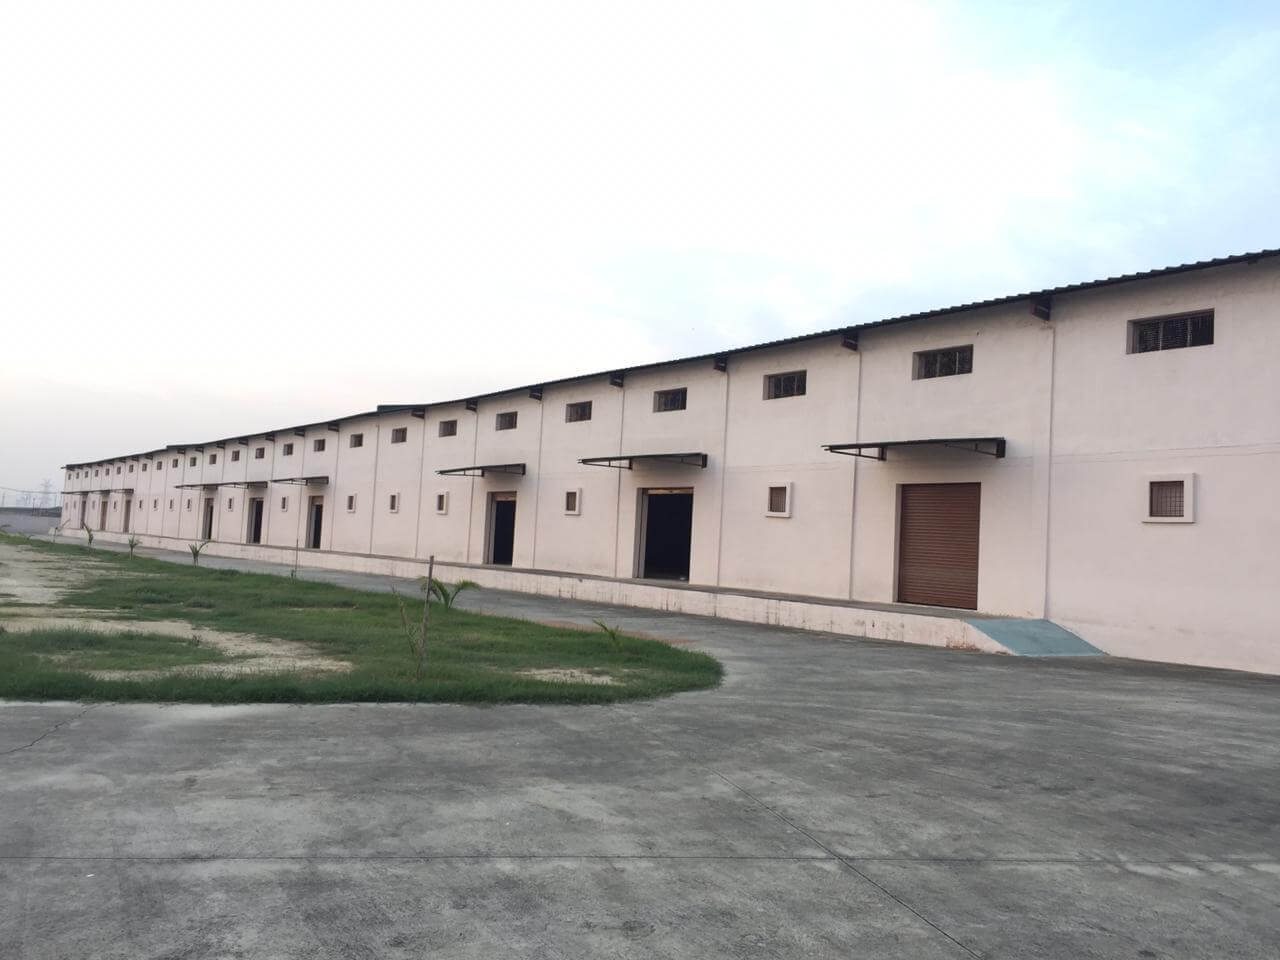 Warehouse / Godown for Rent 150000 Sq. Feet at Bareilly